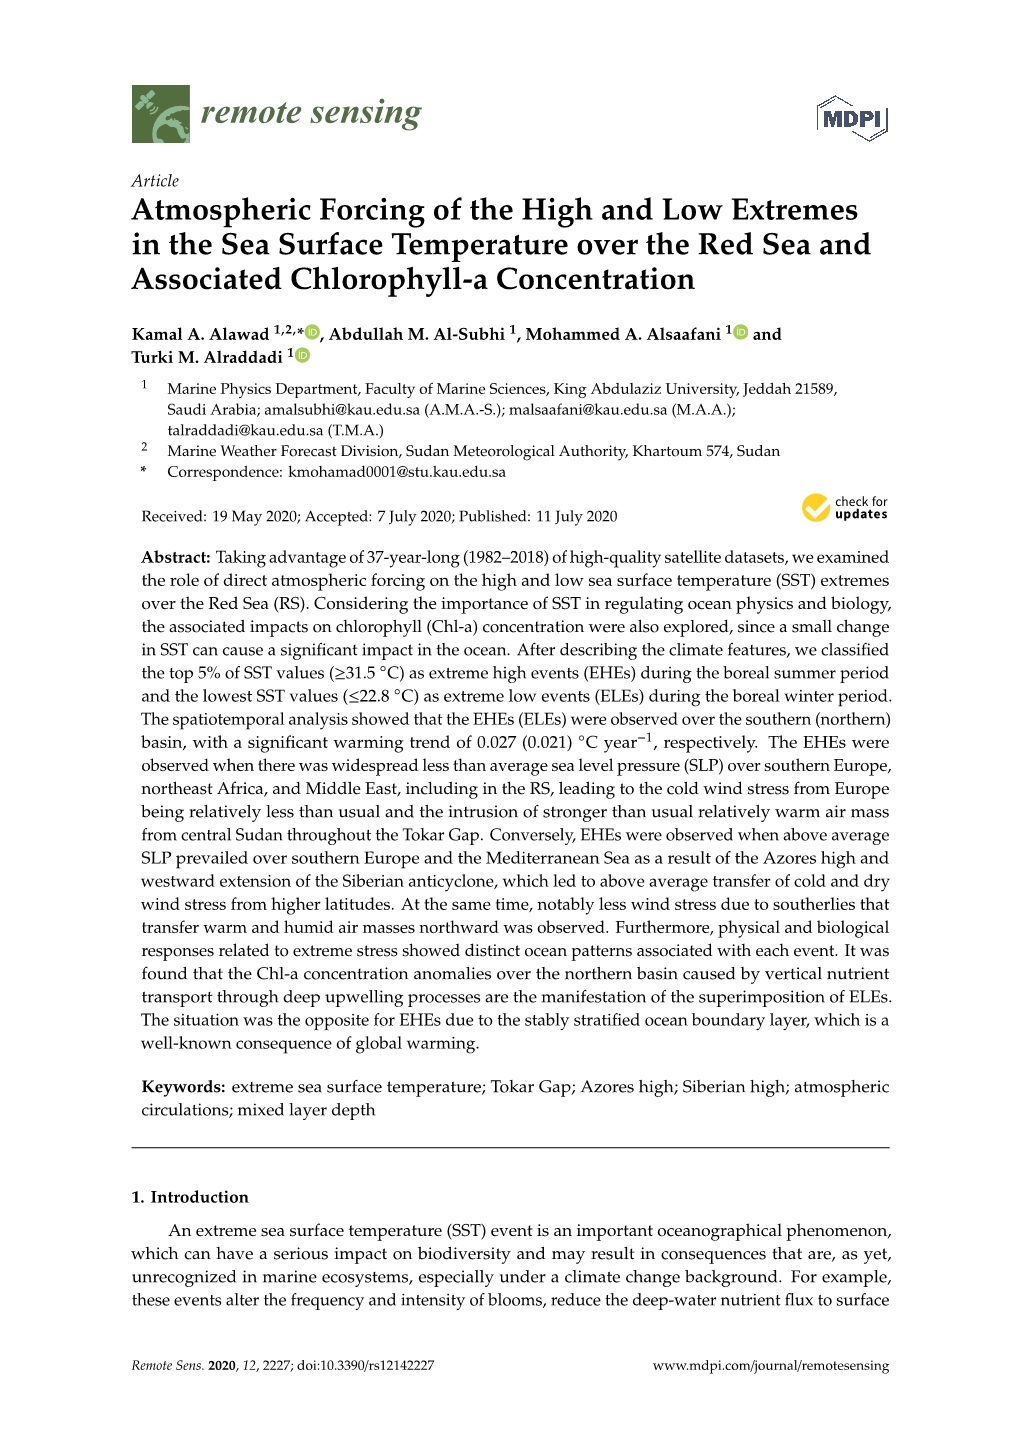 Atmospheric Forcing of the High and Low Extremes in the Sea Surface Temperature Over the Red Sea and Associated Chlorophyll-A Concentration